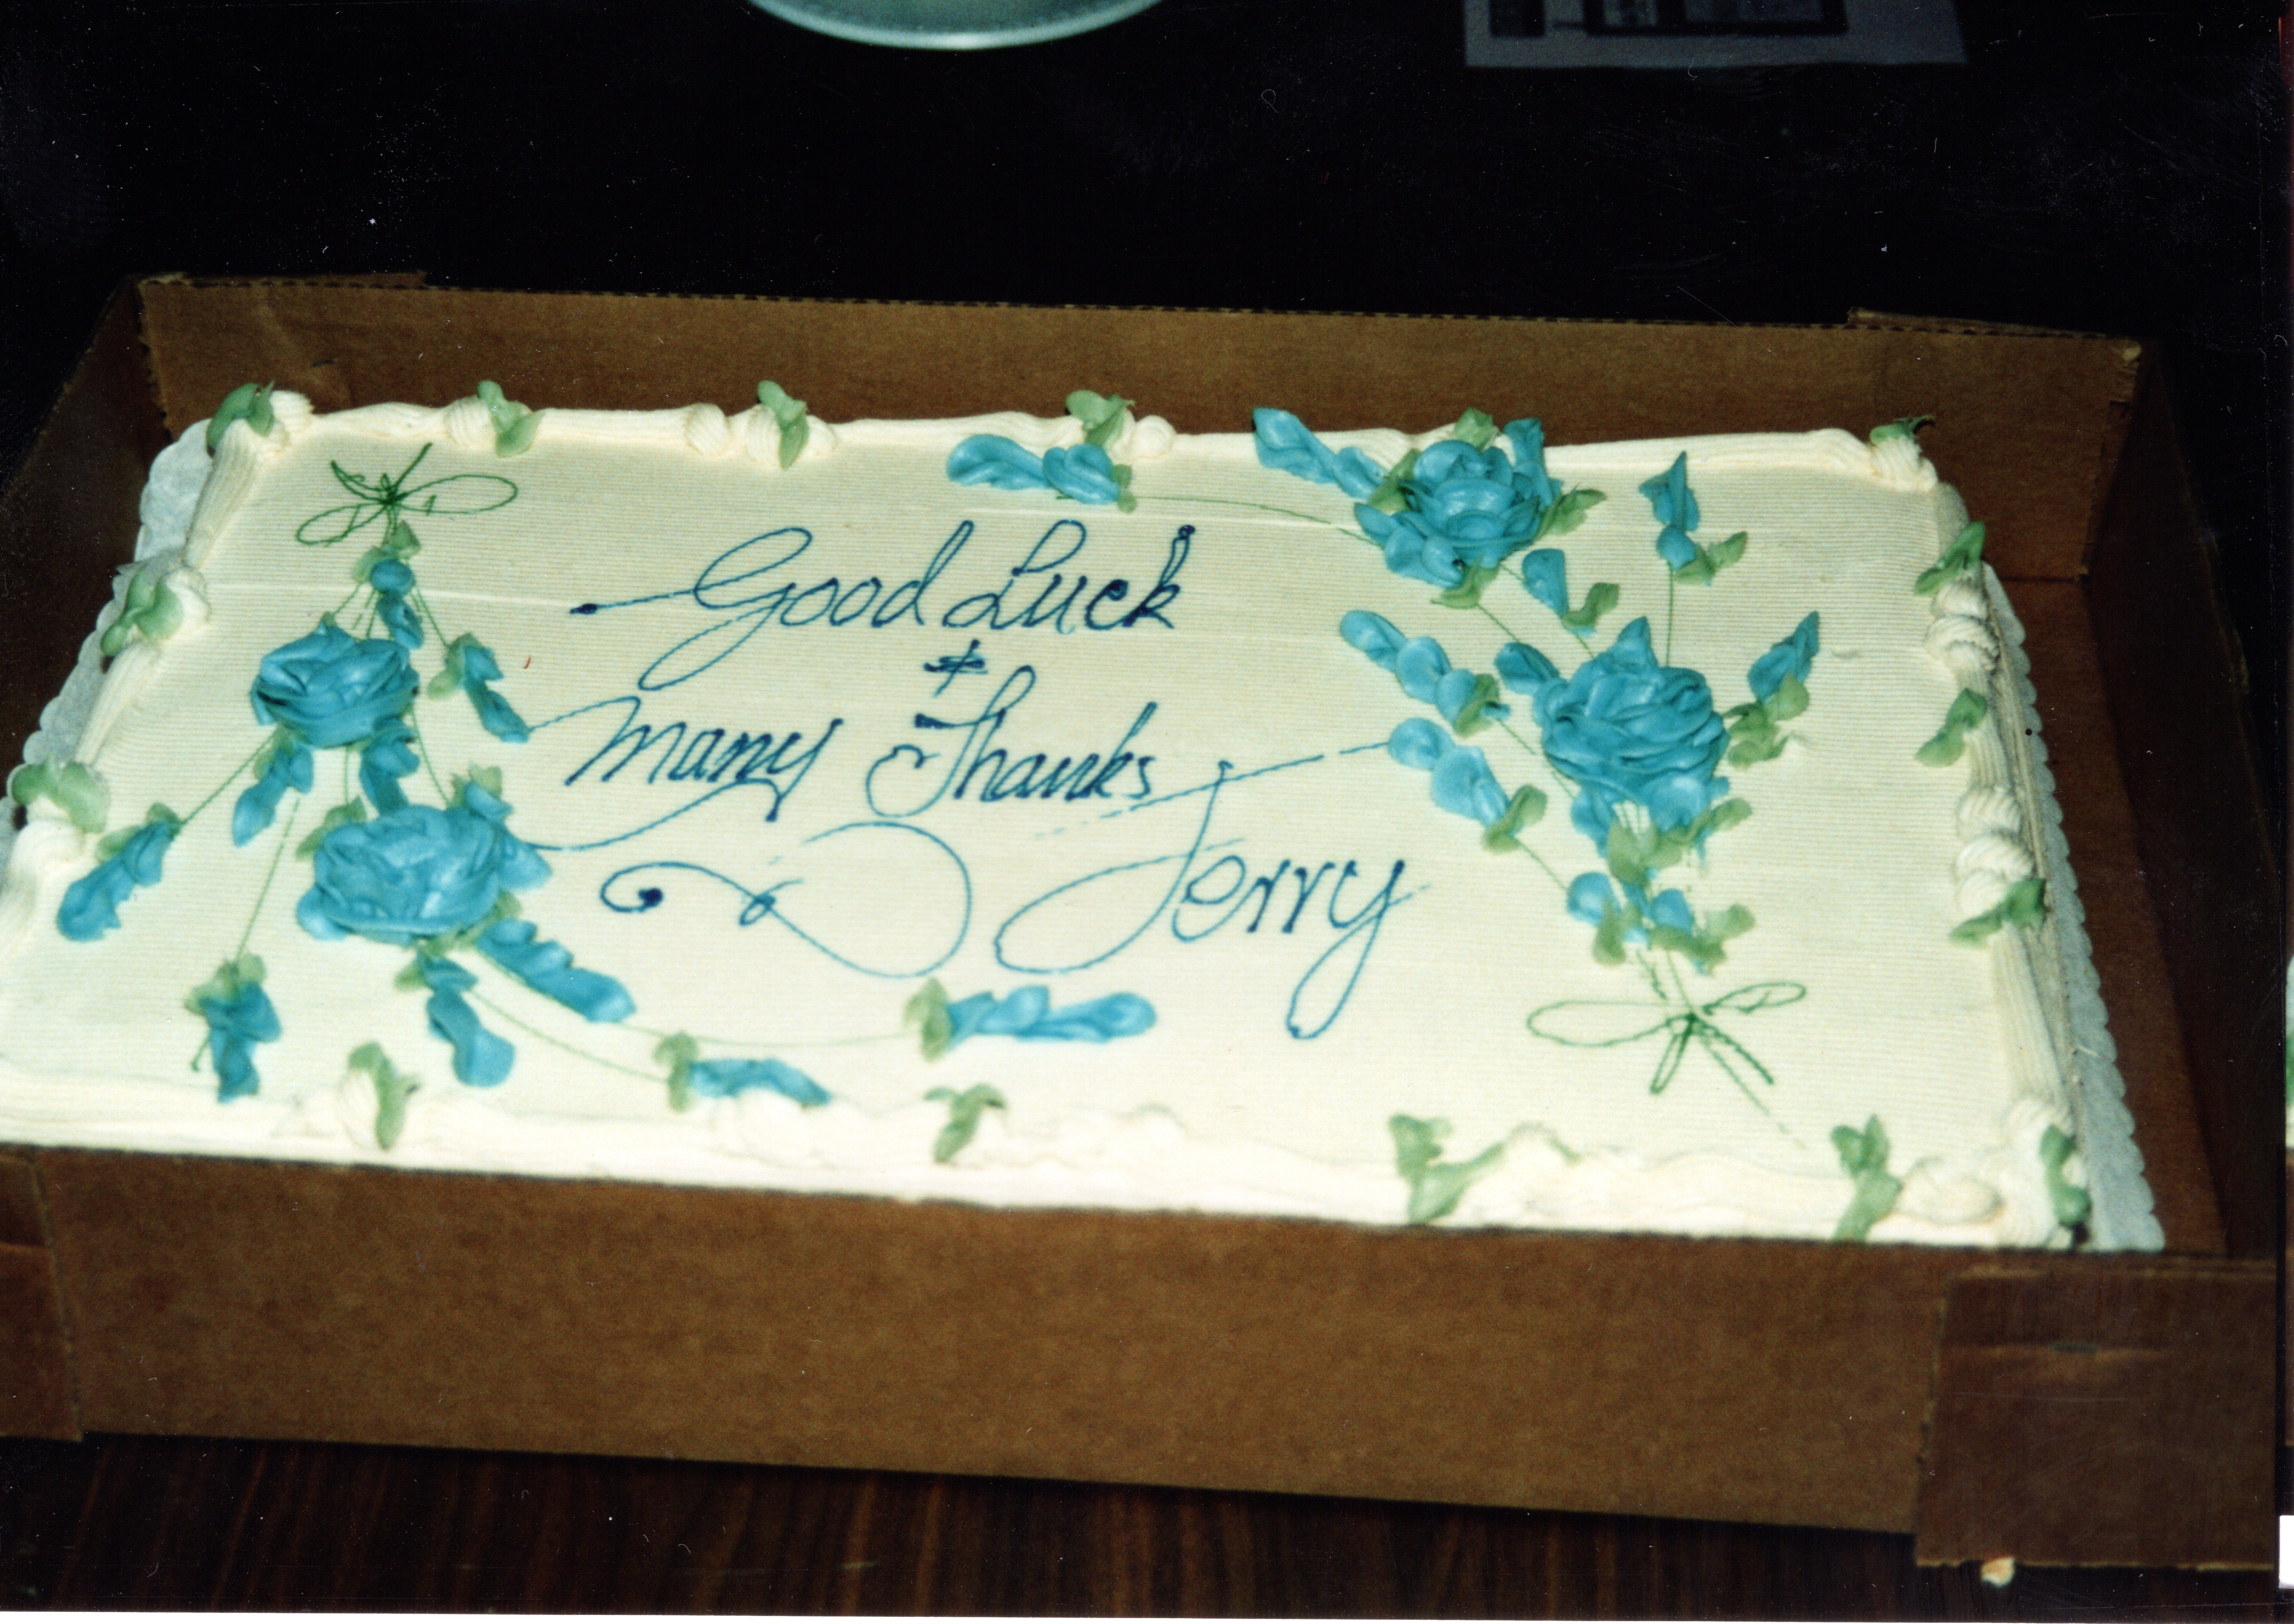 1990 Broadcast Administrator - Jerry Donnelly Leaves - Cake